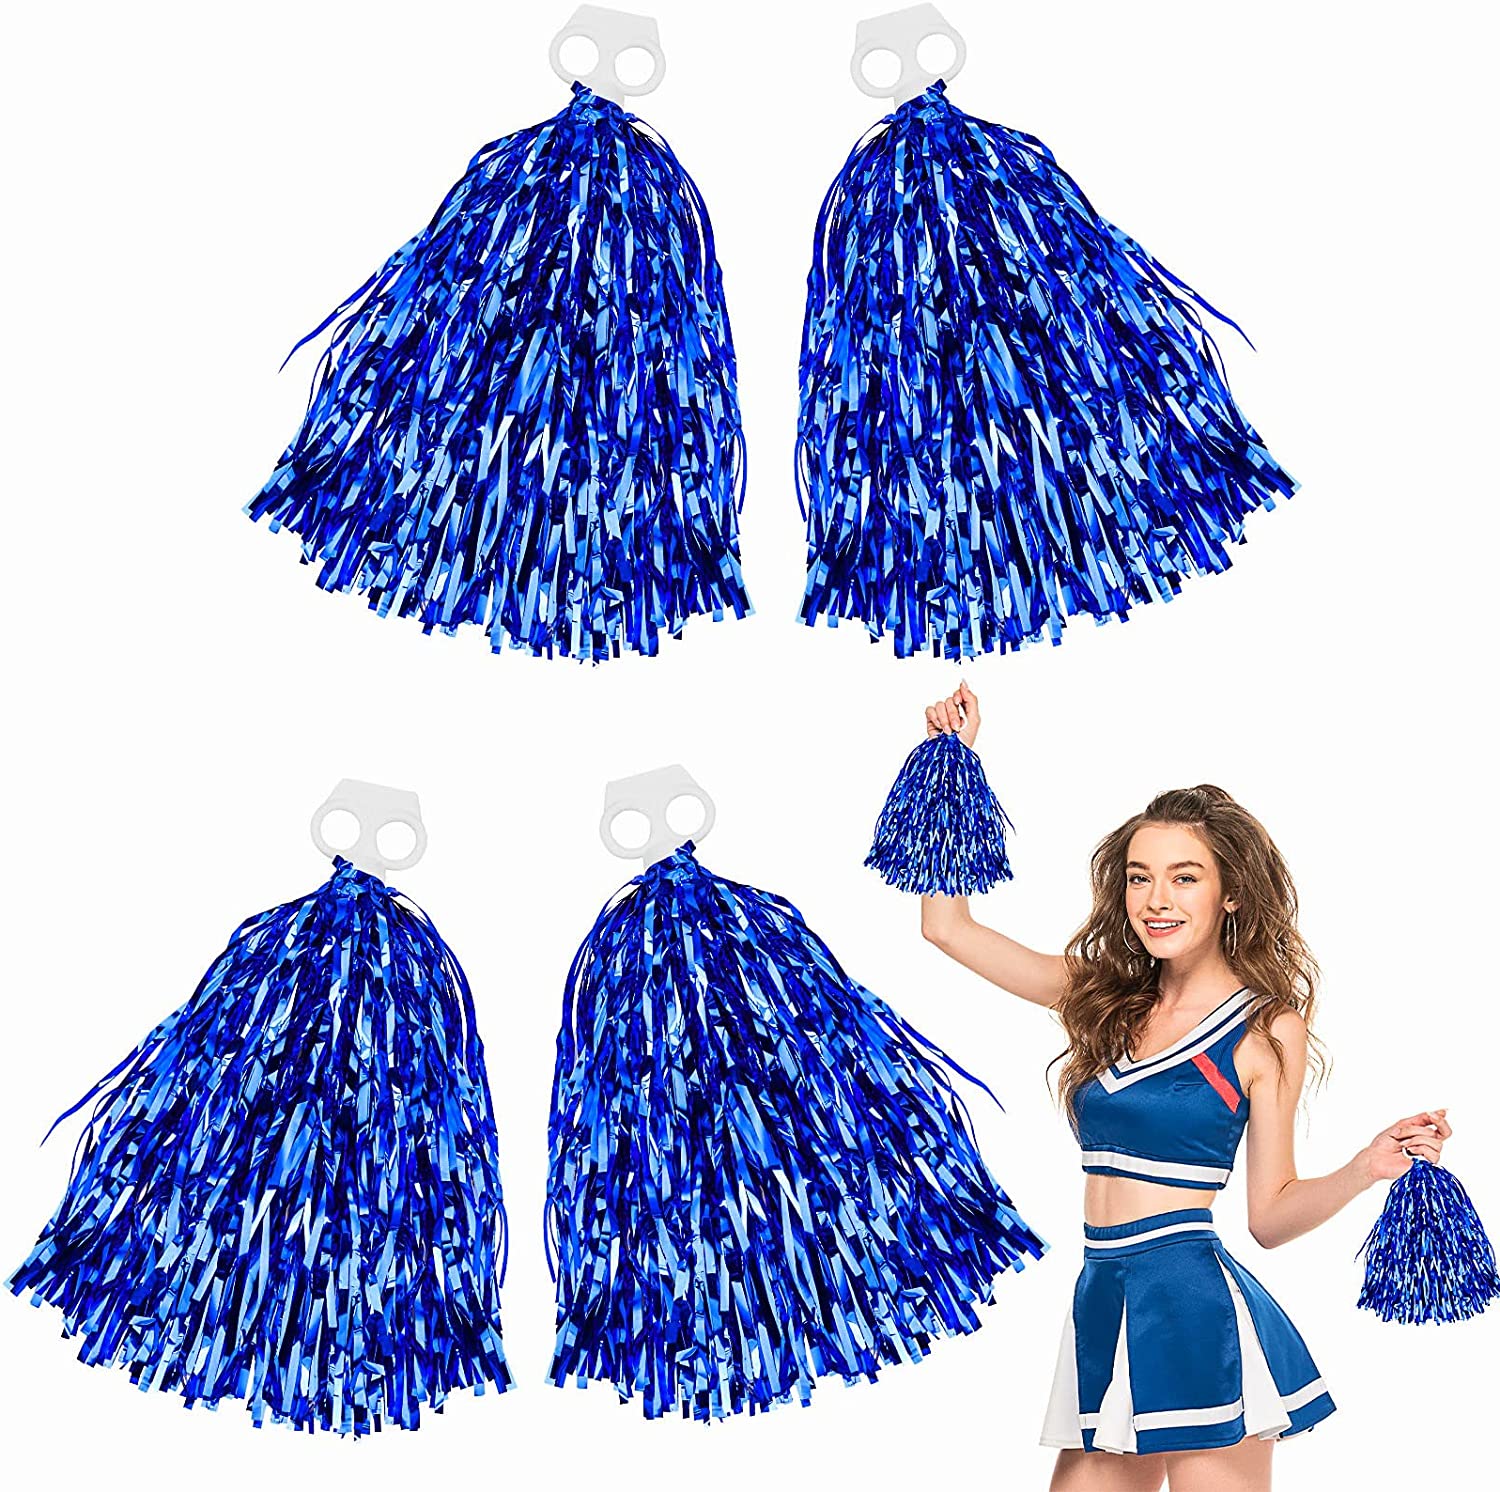  Very Large Assorted Pom Poms for DIY Creative Crafts